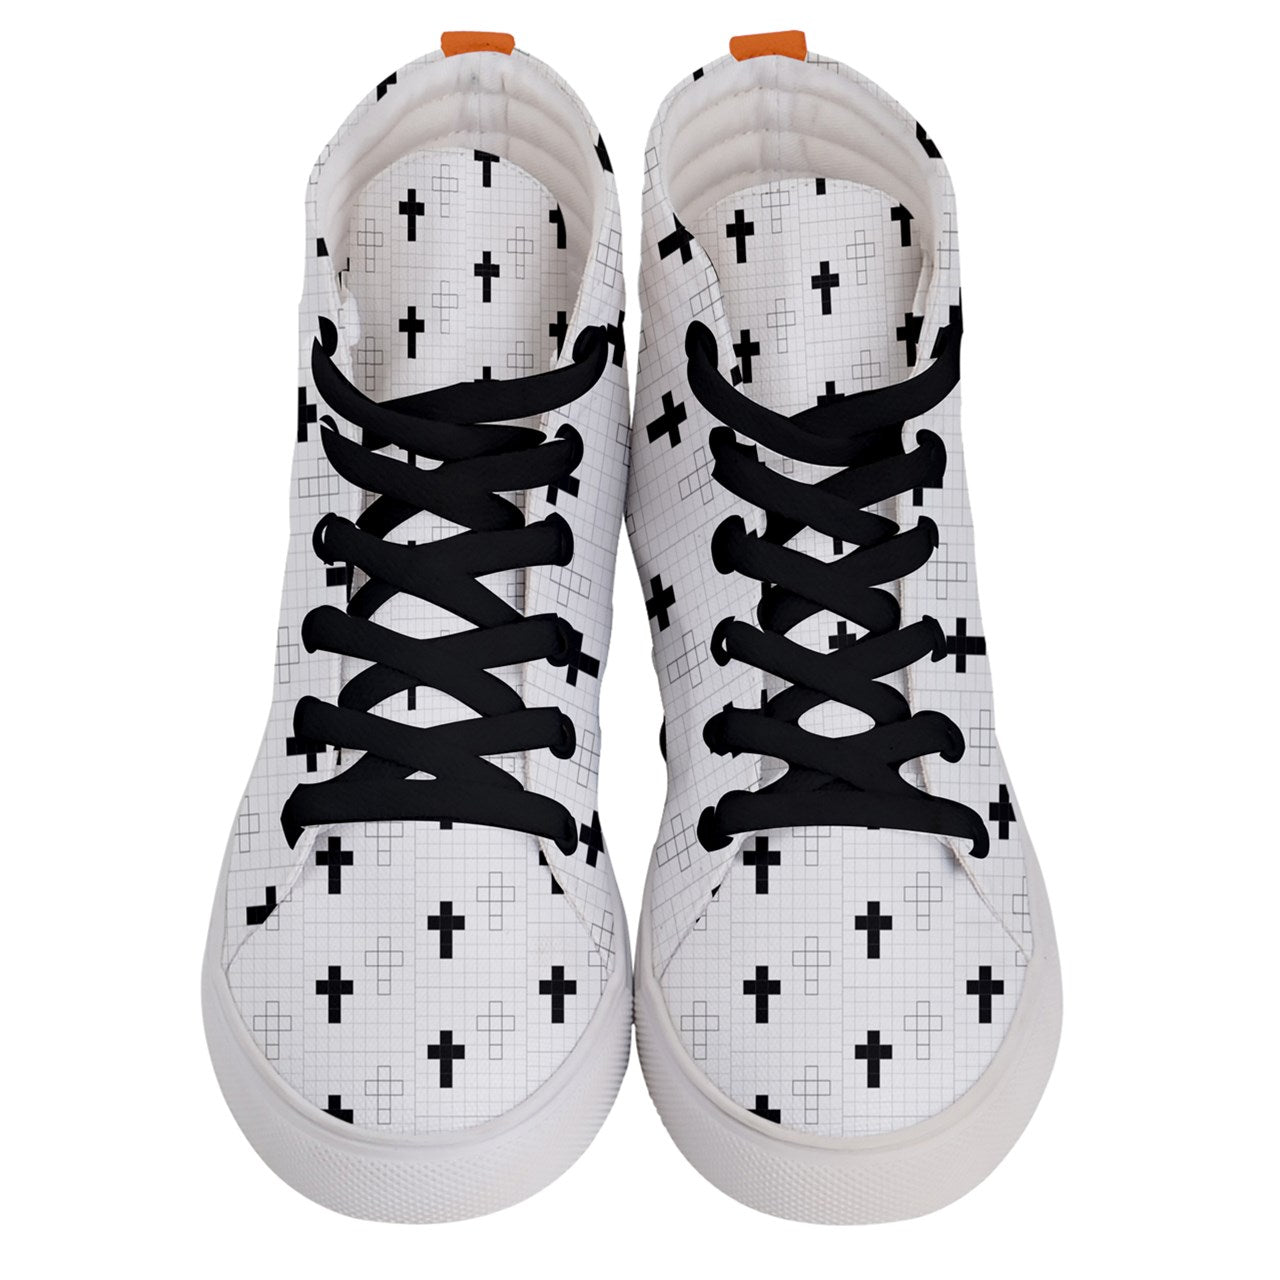 DPIDOL Freehand Collection Women's Hi-Top Skate Sneakers